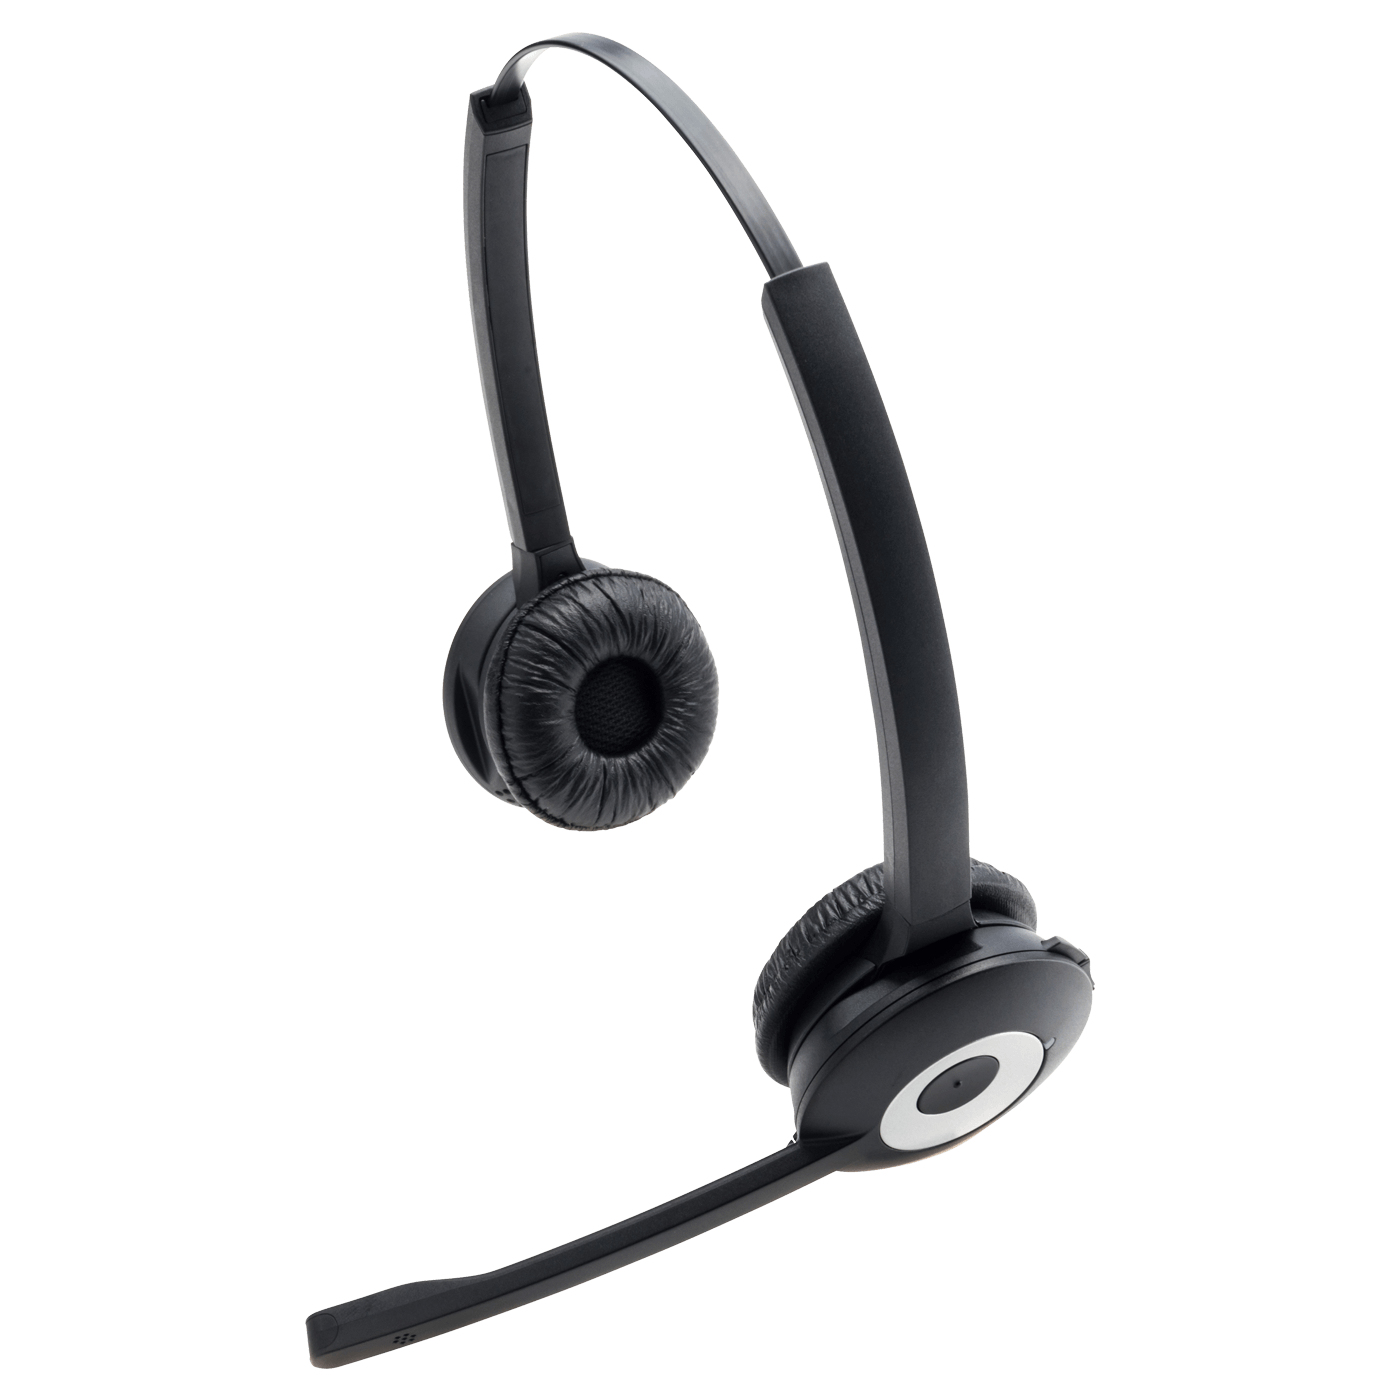 GN Jabra 920 Pro headset stereo noise cancelling